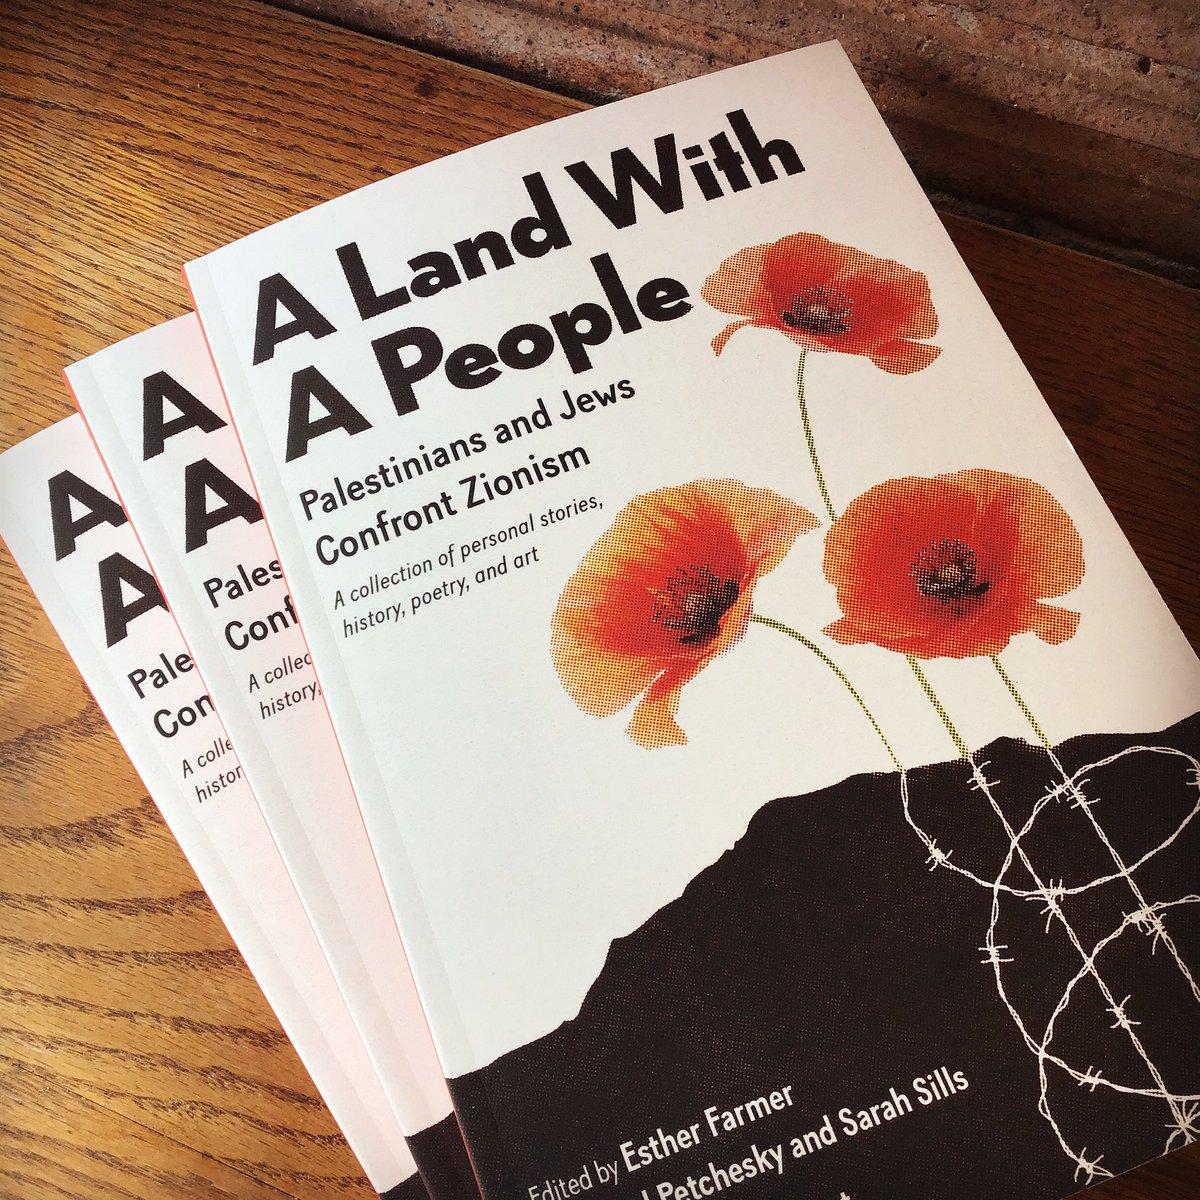 “A Land With a People elevates rarely heard Palestinian & Jewish voices and visions… Stories touch hearts, open minds, & transform our understanding of the ‘other’… charting 150 years of Palestinian & Jewish resistance to Zionism.” burningbooks.com/collections/ju…